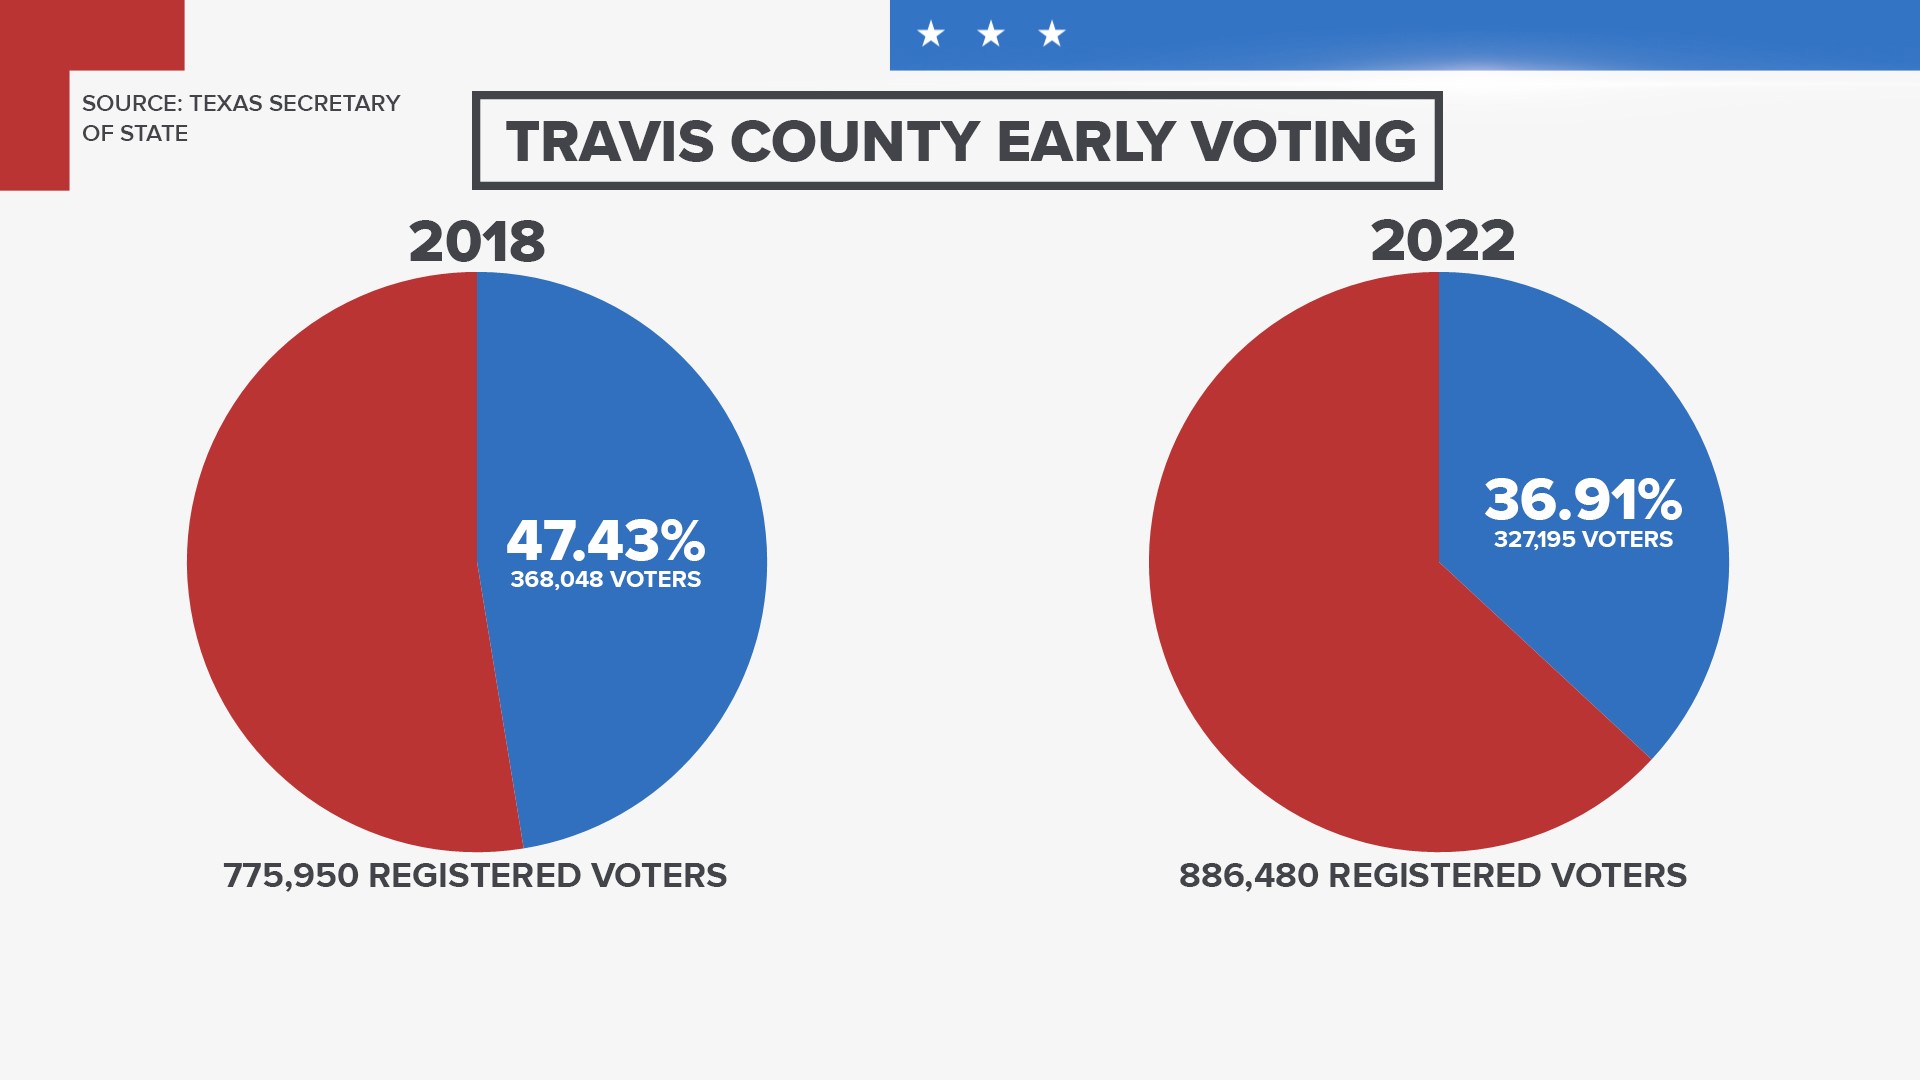 Data from the Texas Secretary of State shows the three counties have seen an increase in registered voters from four years ago.